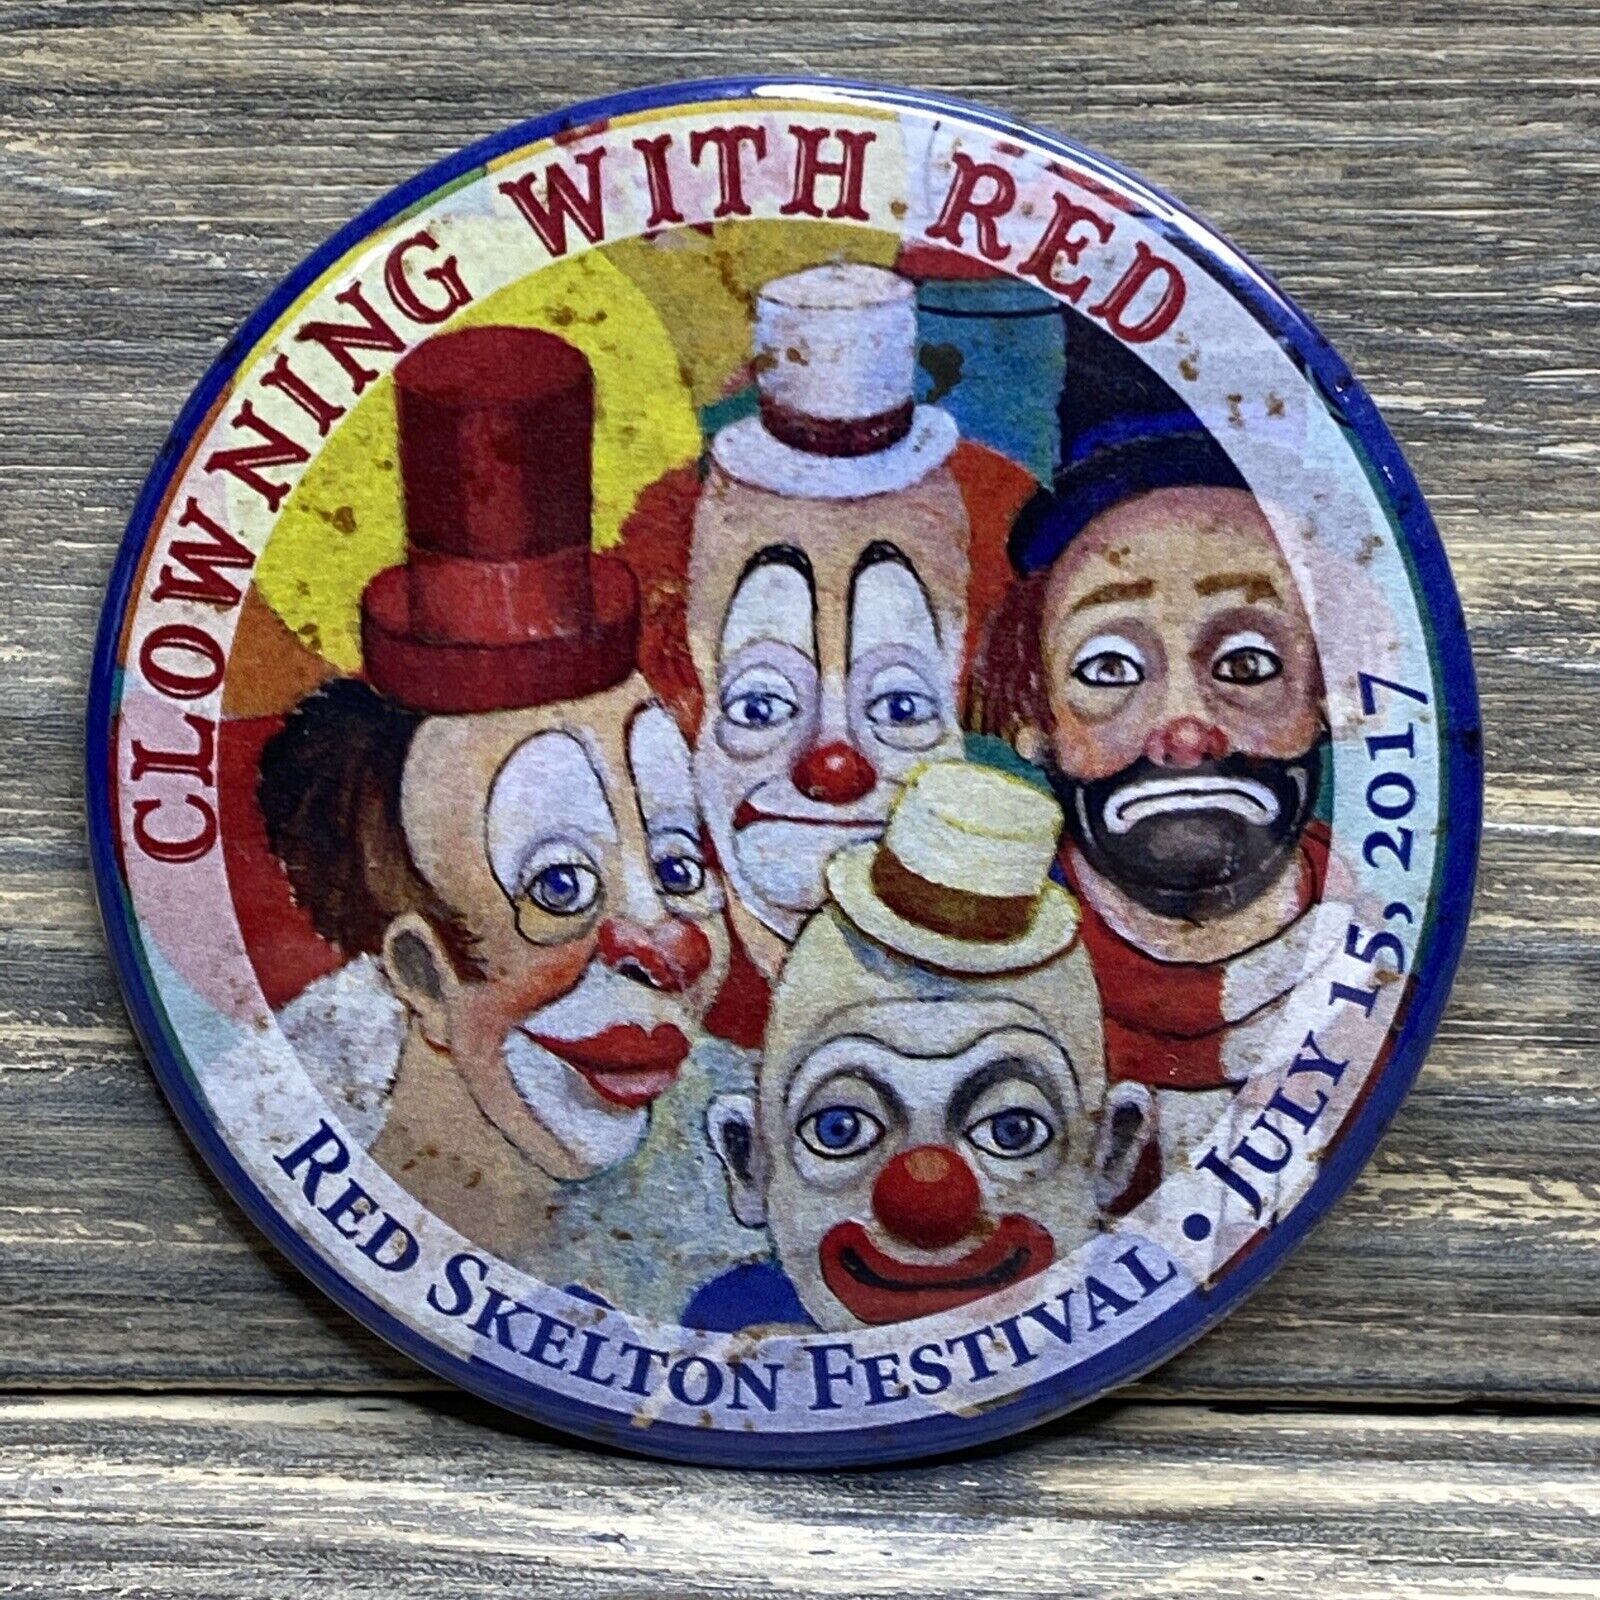 Red Skelton July 15, 2017 Clowning With Red Round Button Pin Clowns 3\